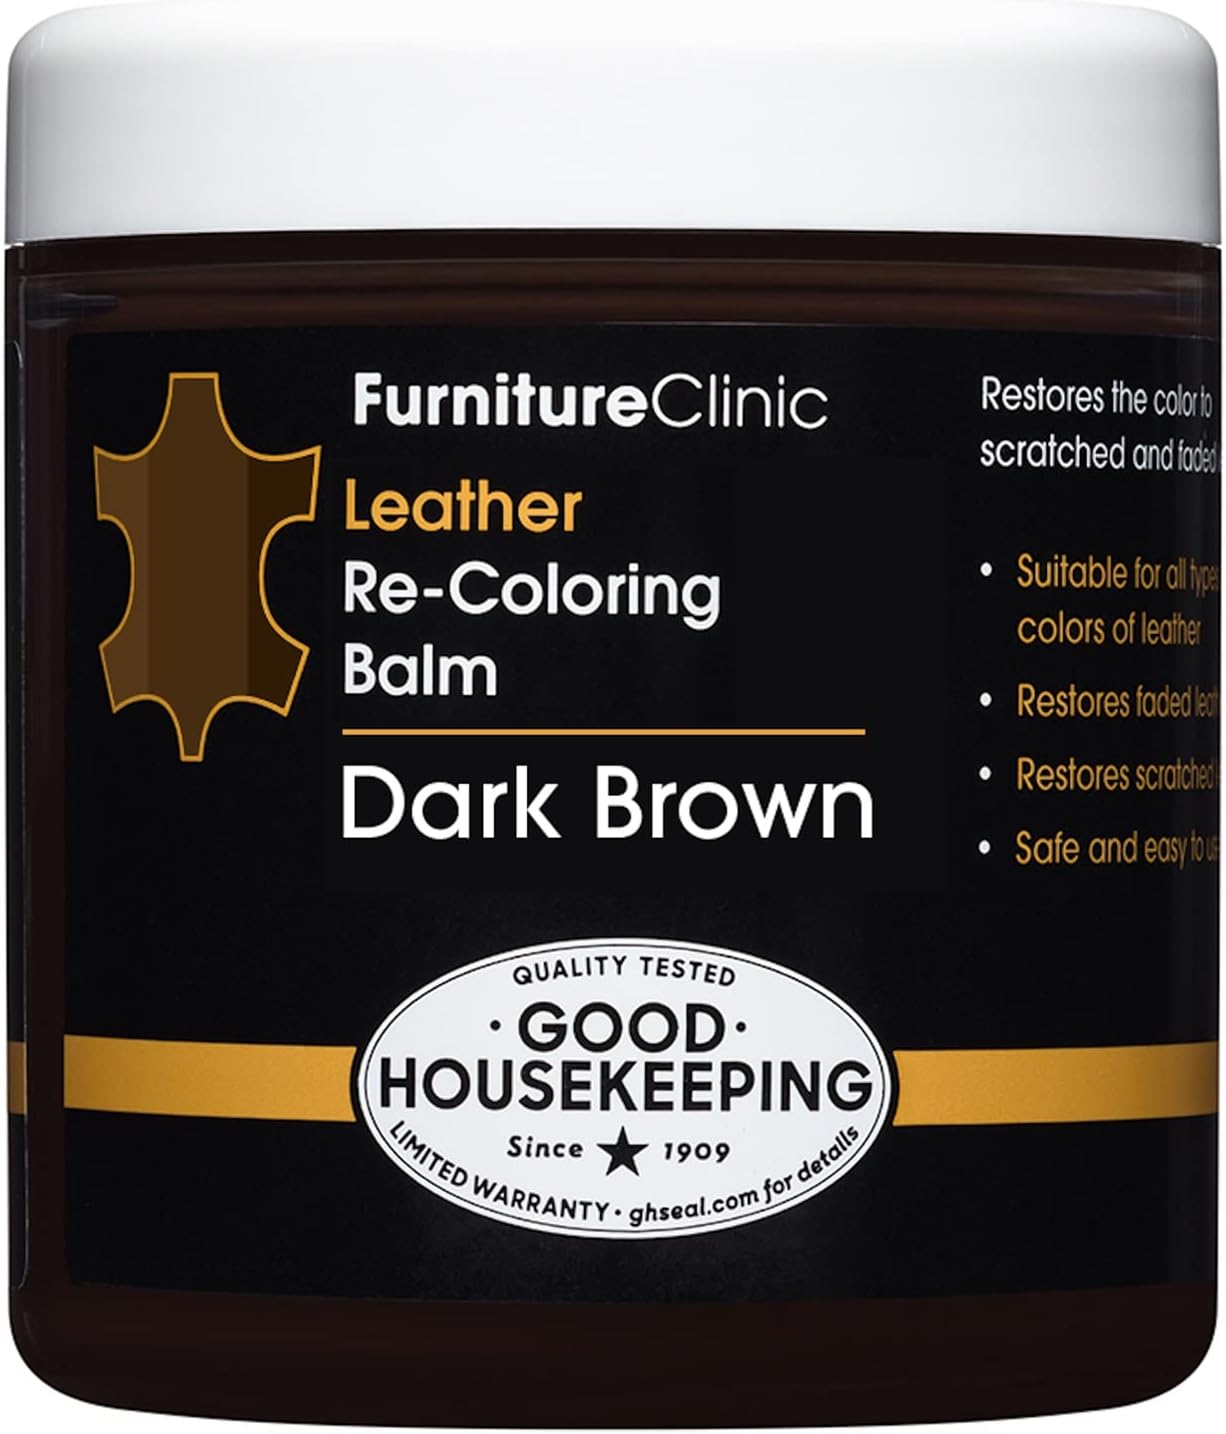 The Original Leather Recoloring Balm by Furniture [...]